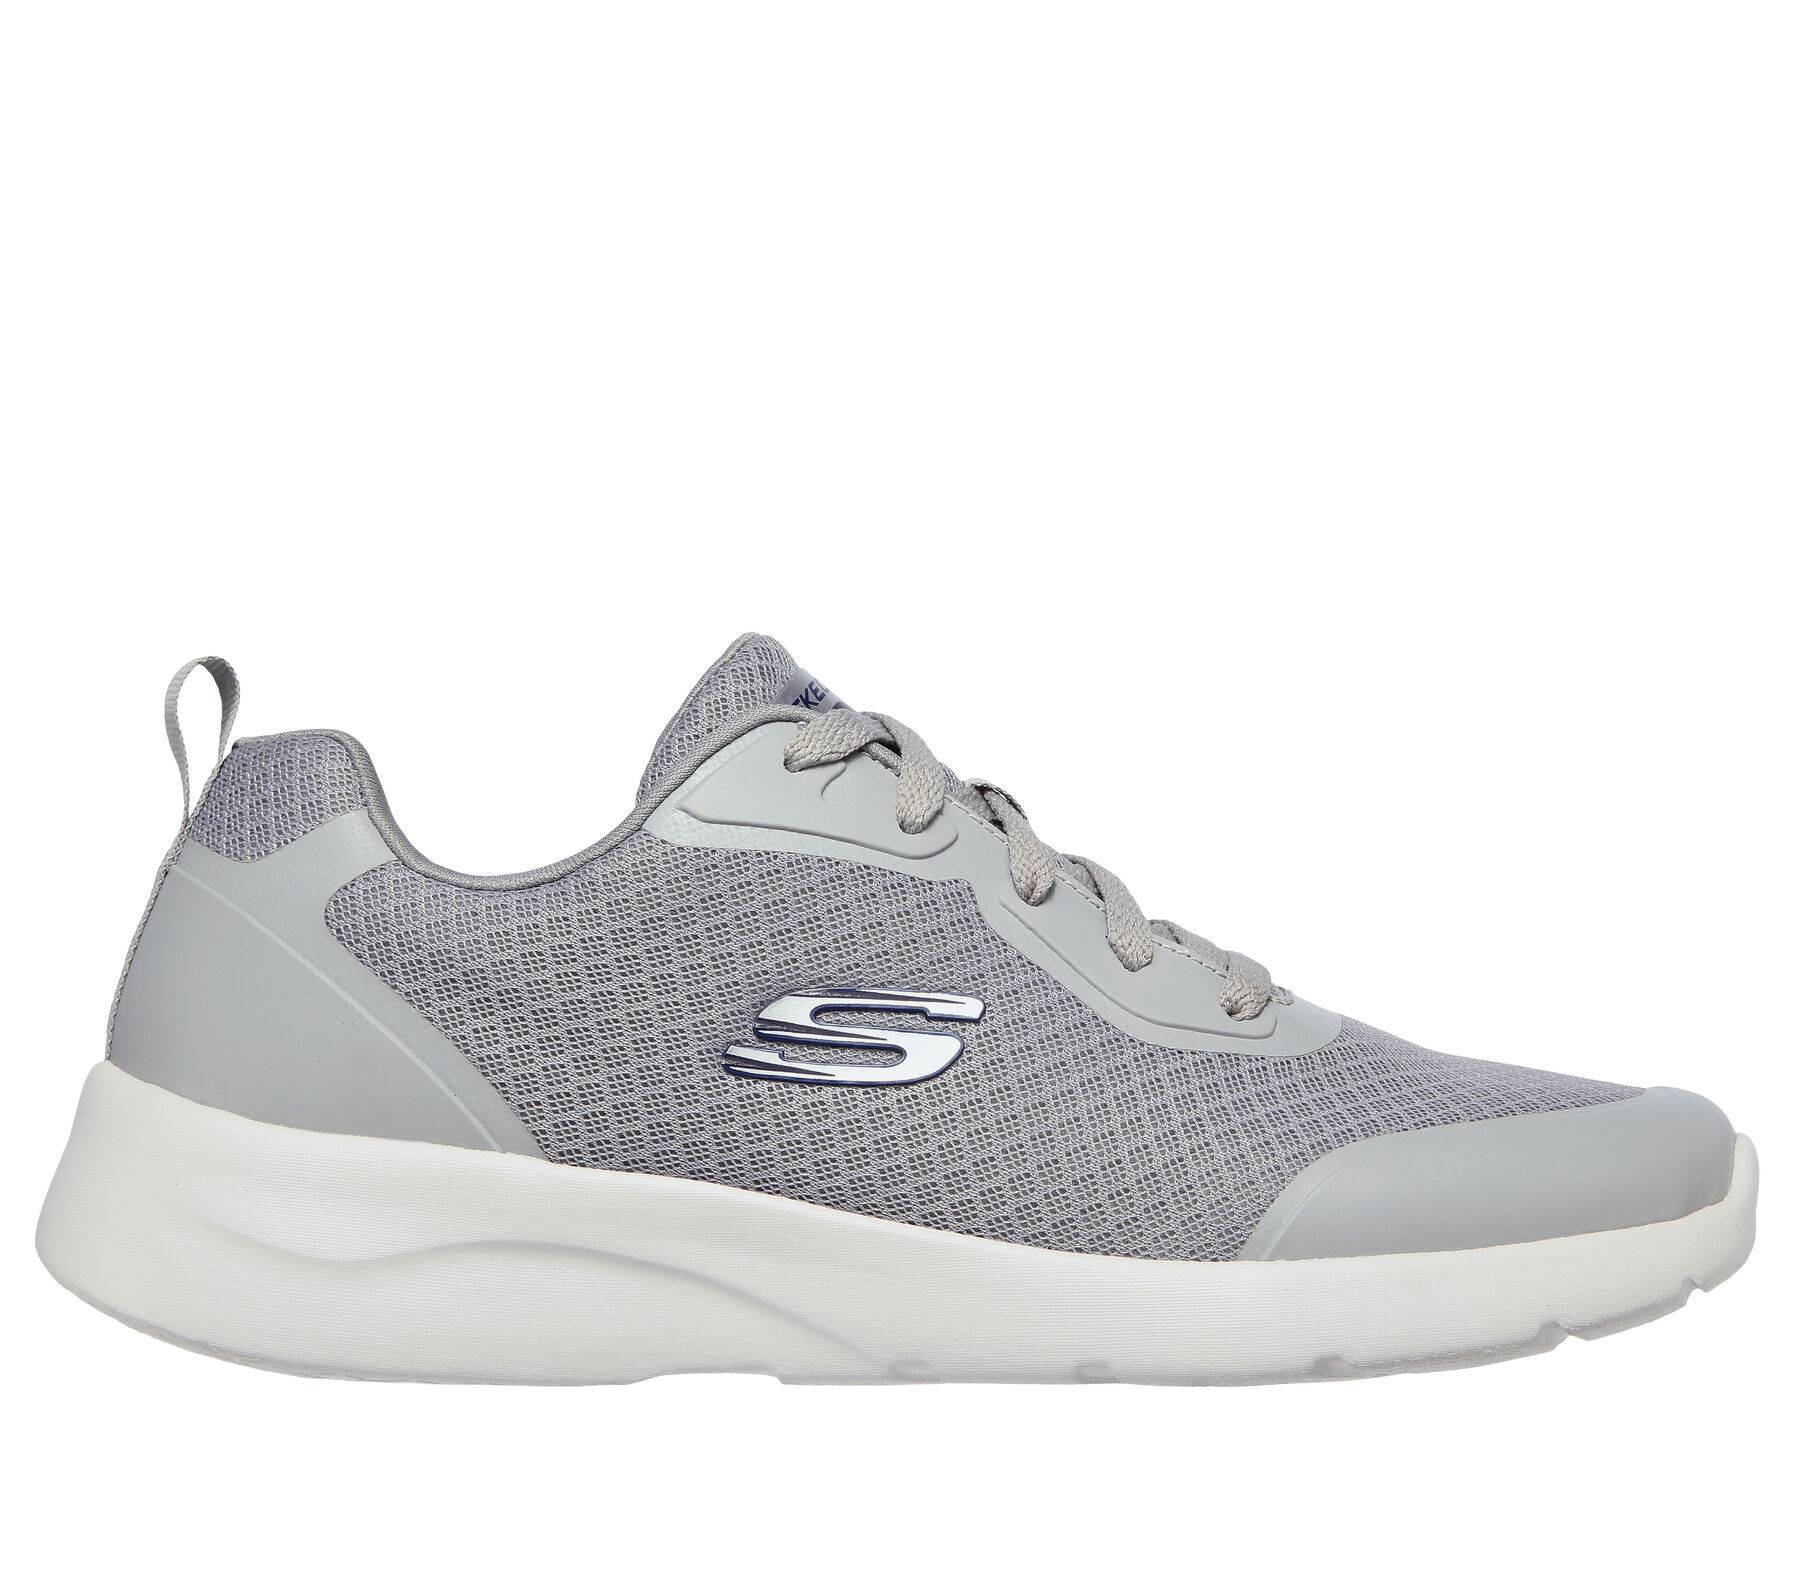 Shop the Dynamight 2.0 - Full Pace | SKECHERS